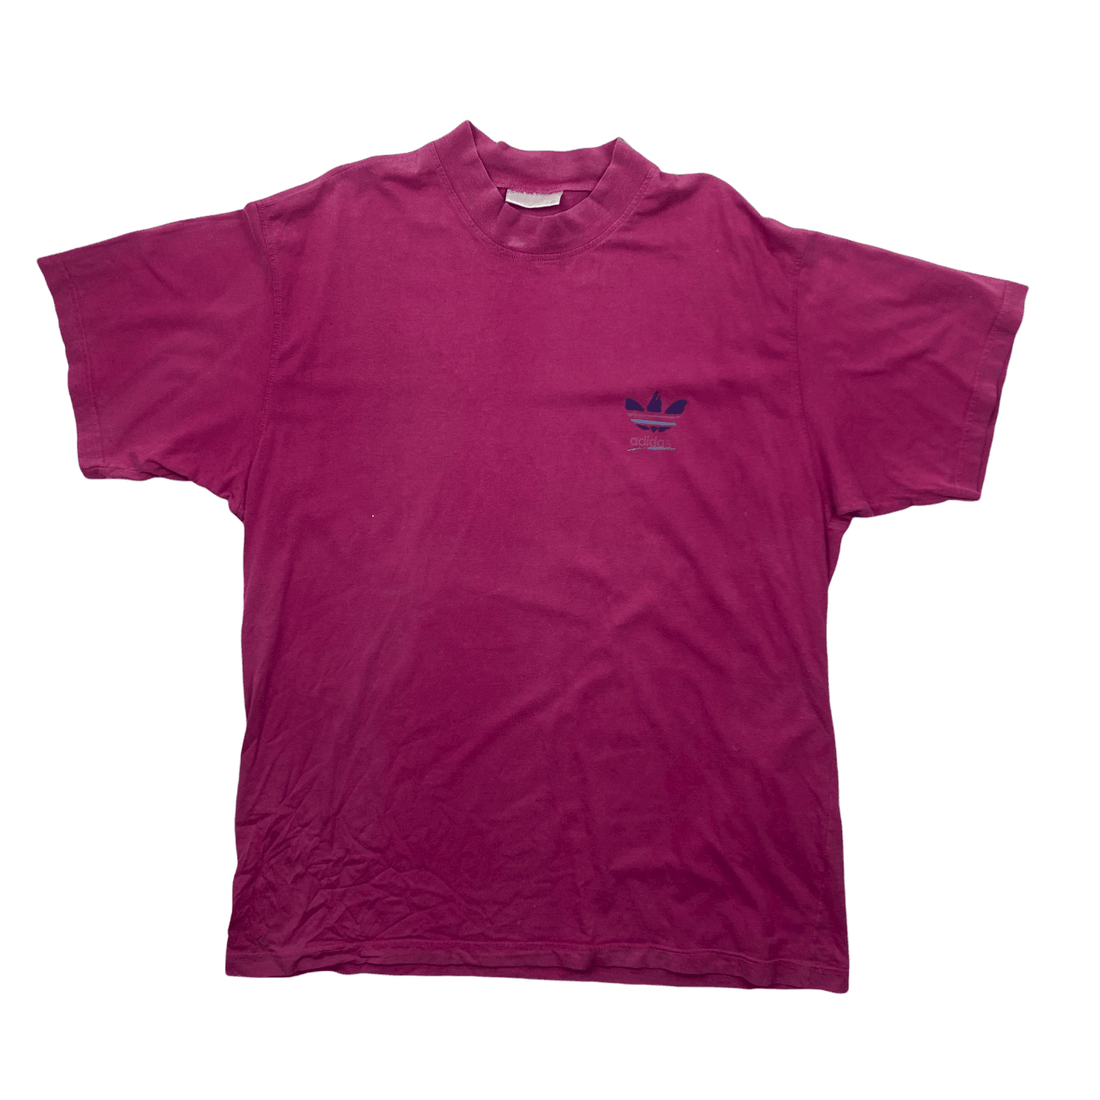 Vintage 90s Pink Adidas Spell-Out Tee - Large - The Streetwear Studio